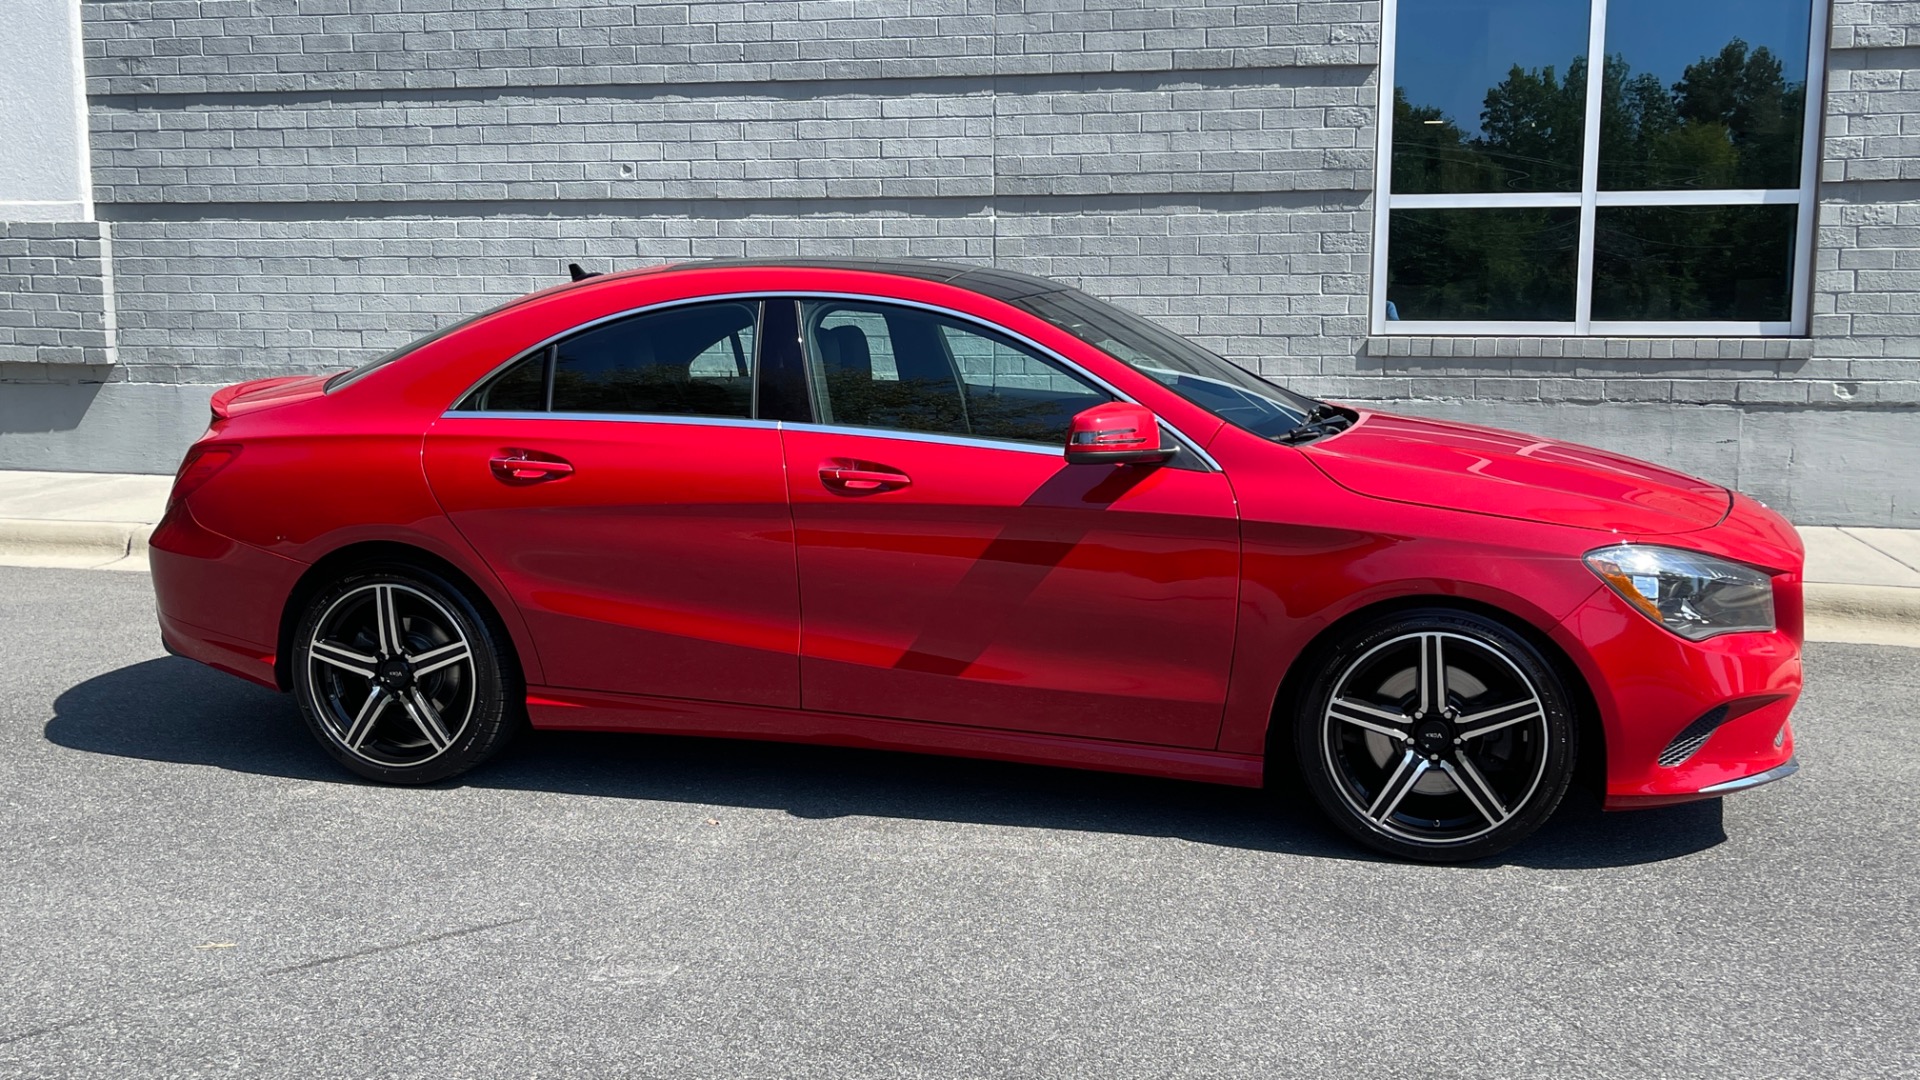 Used 2017 Mercedes-Benz CLA CLA250 / PREMIUM / CONVENIENCE / AMBIENT LIGHTS / BLACK TRIM / SPOILER for sale Sold at Formula Imports in Charlotte NC 28227 6